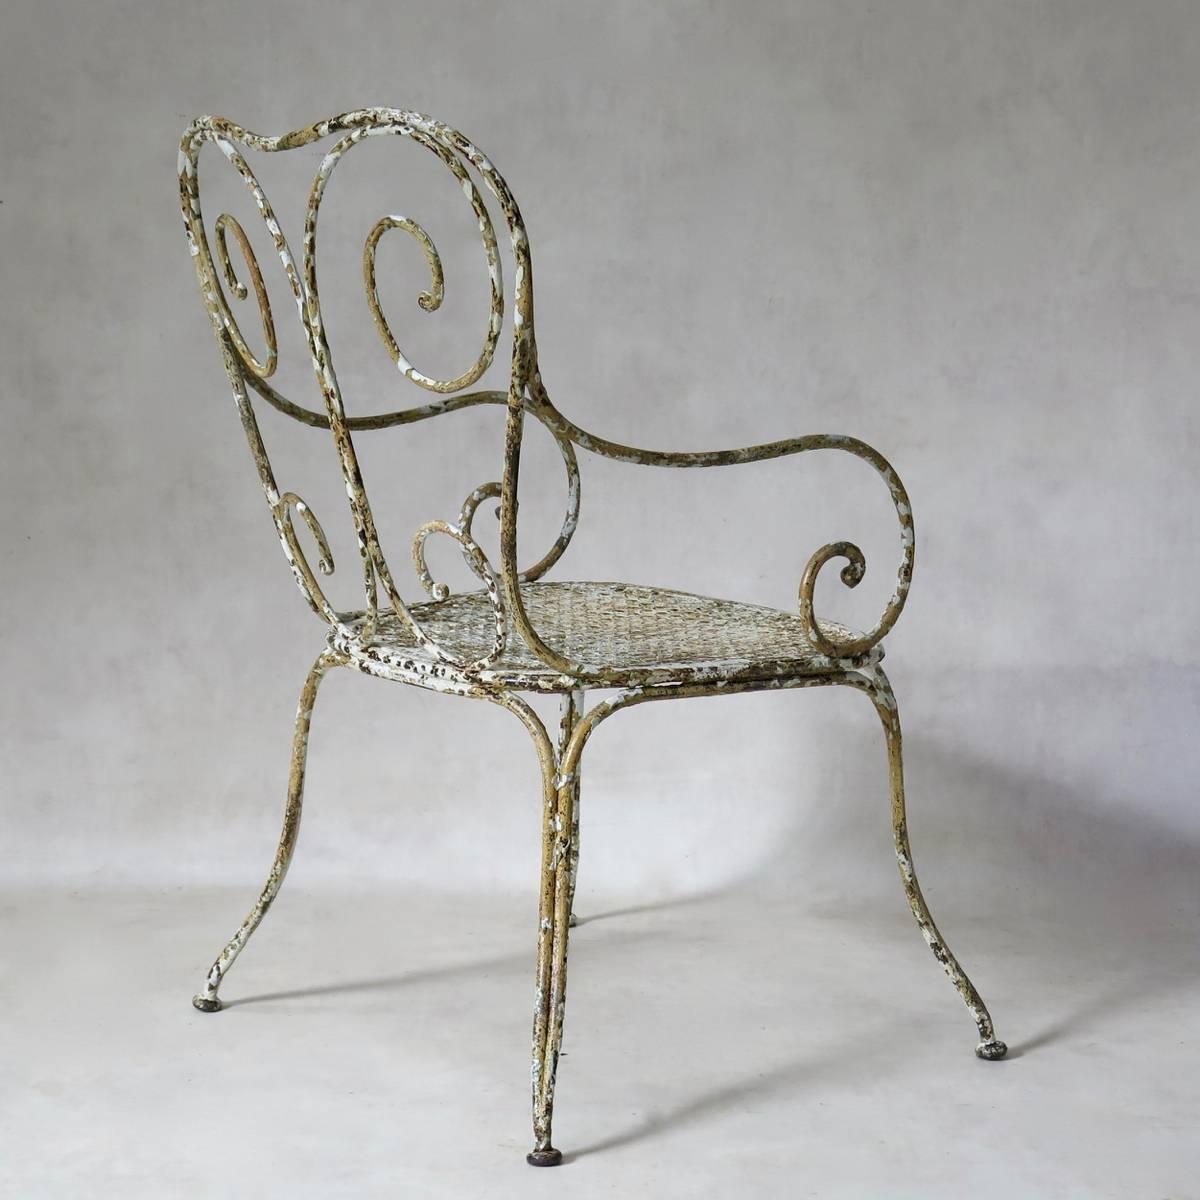 Large Wrought Iron Chair, France, circa 1900 In Distressed Condition In Isle Sur La Sorgue, Vaucluse